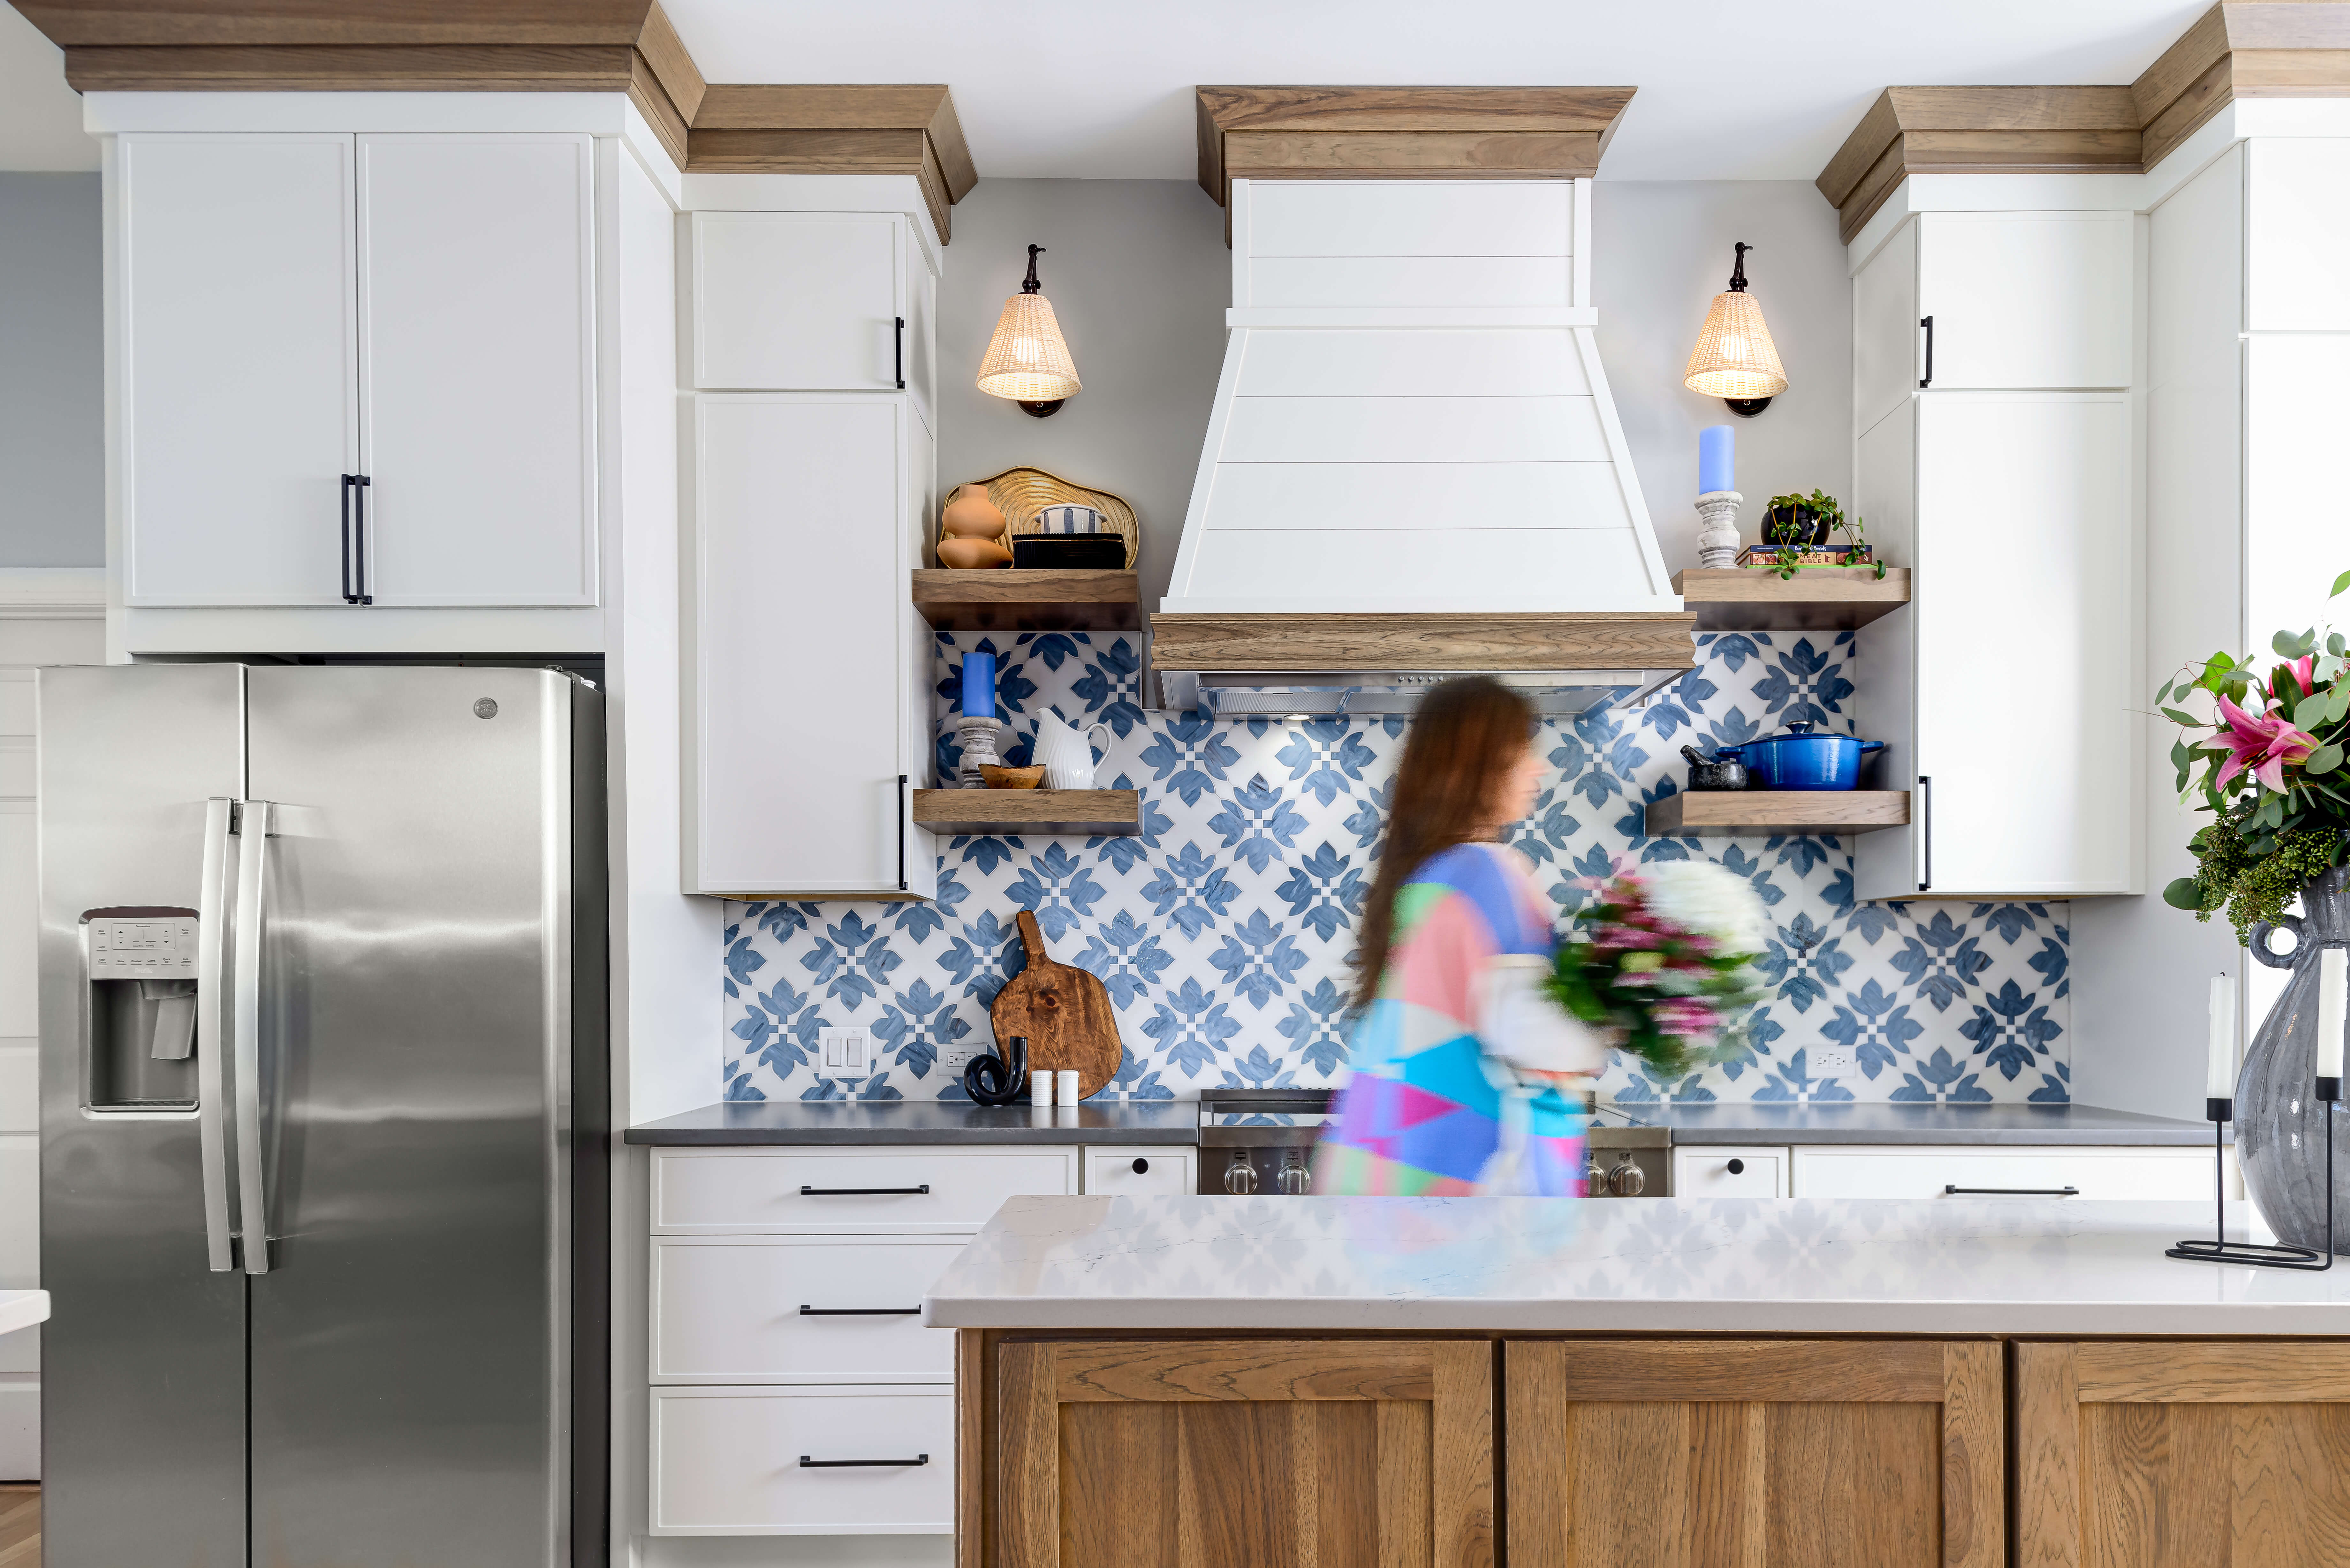 A bright and colorful Modern Farmhouse style kitchen design with an independent shiplap wood hood and floating shelves.